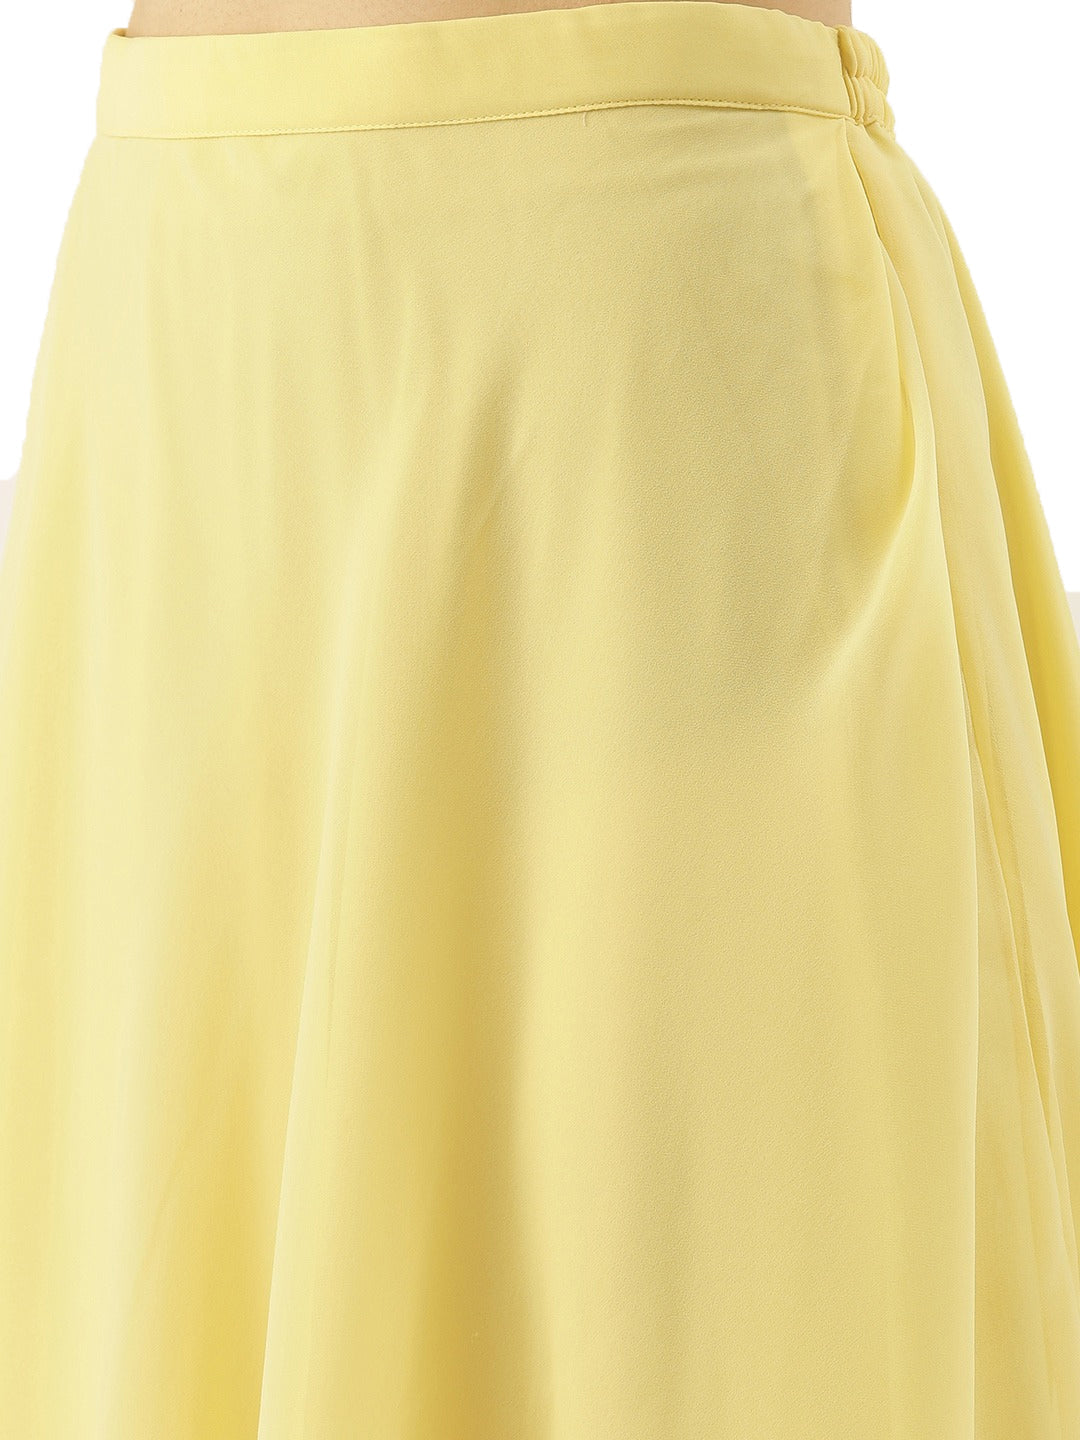 Yellow-Embroidery-Jacket-With-Top-&-Skirt